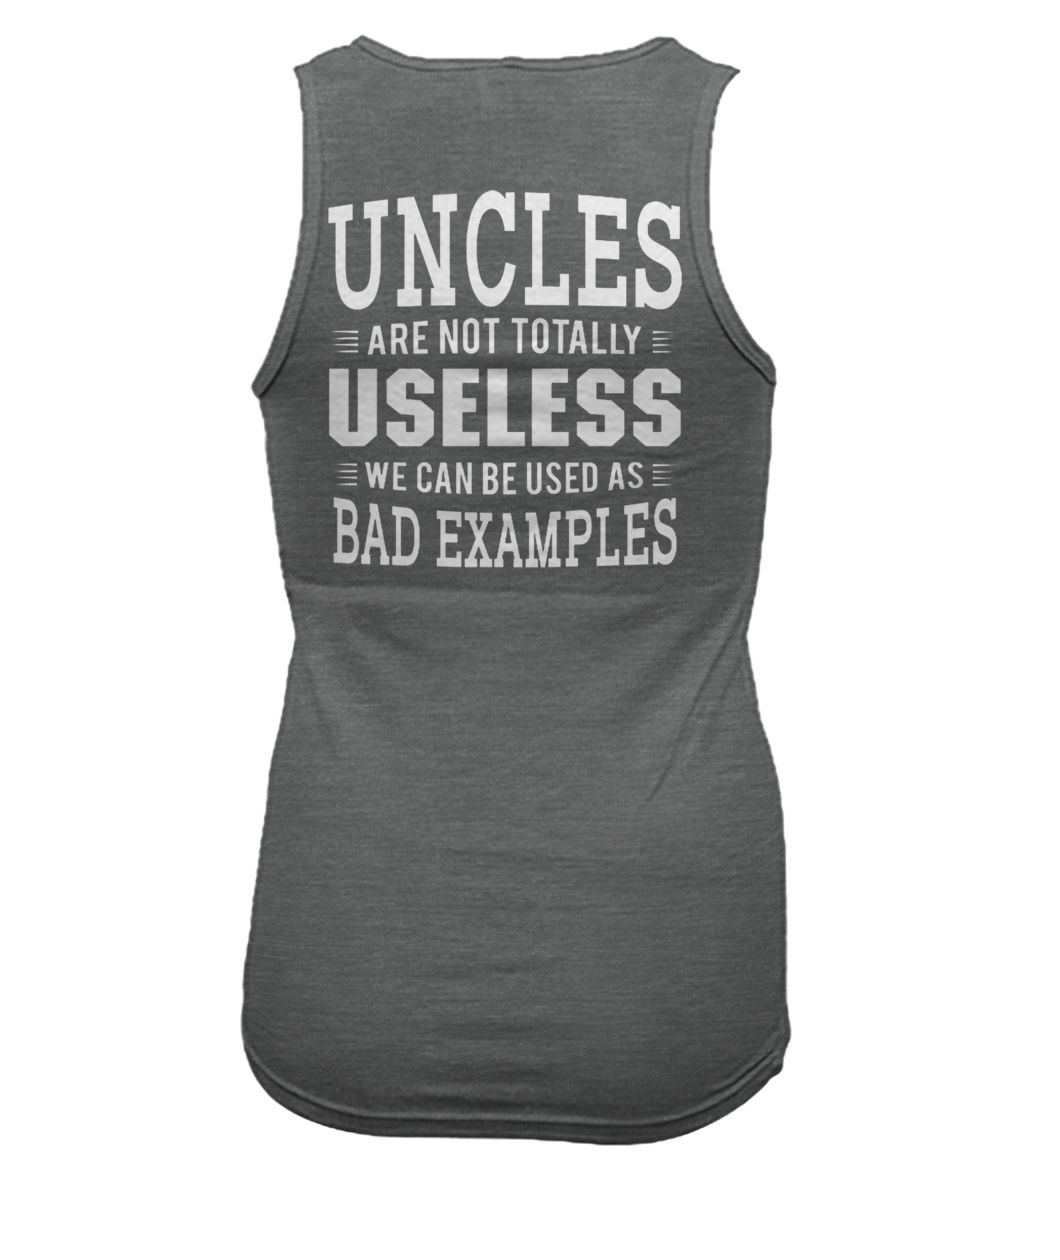 Uncles are not totally useless we can be used as bad example women's tank top